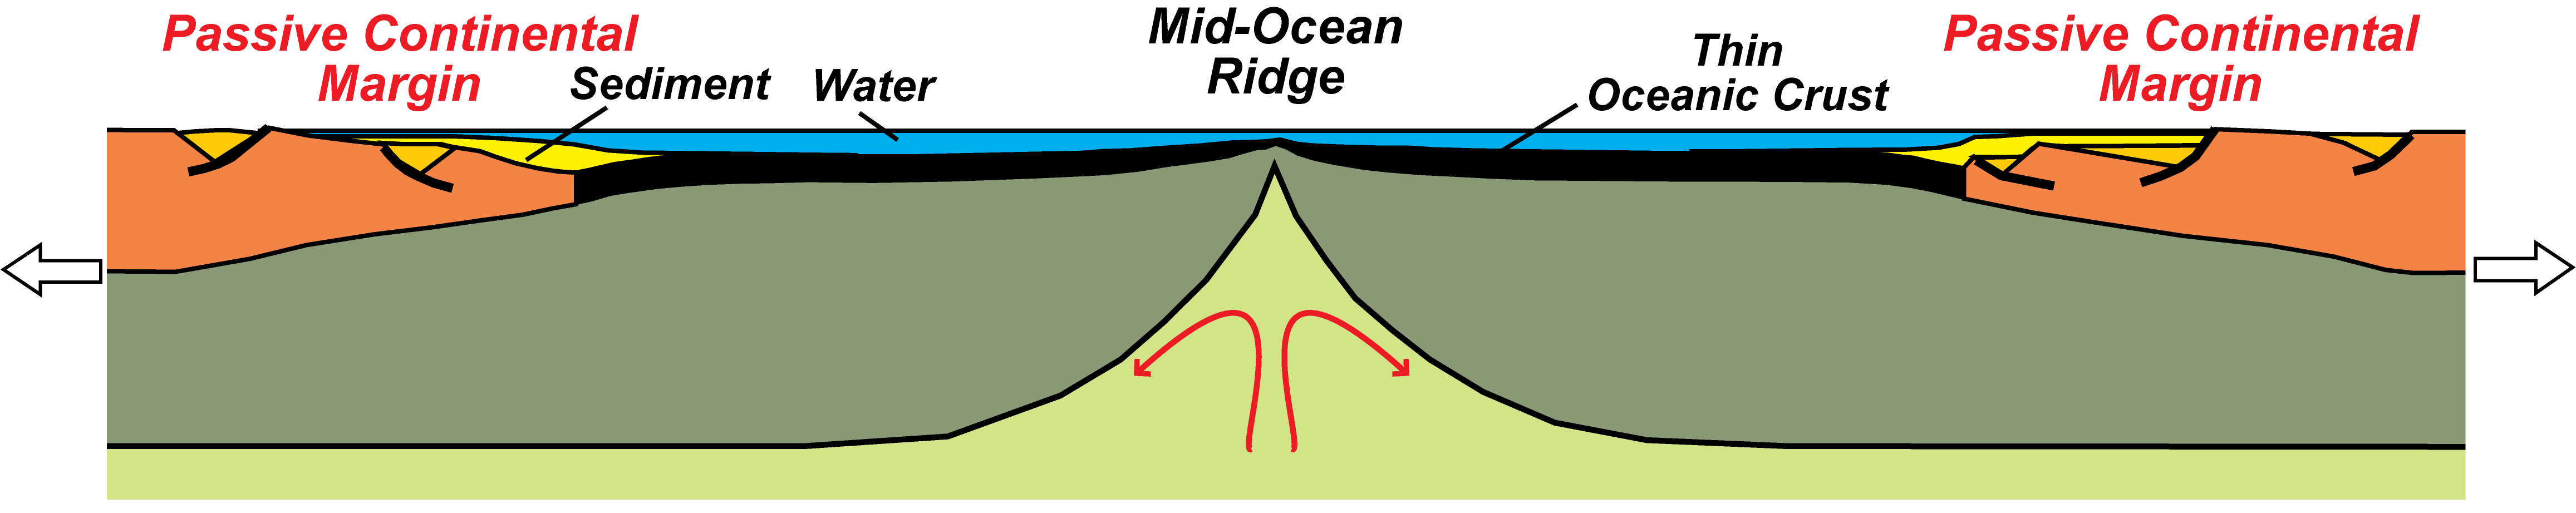 block diagram of earth's surface layers at oceanic spreading center